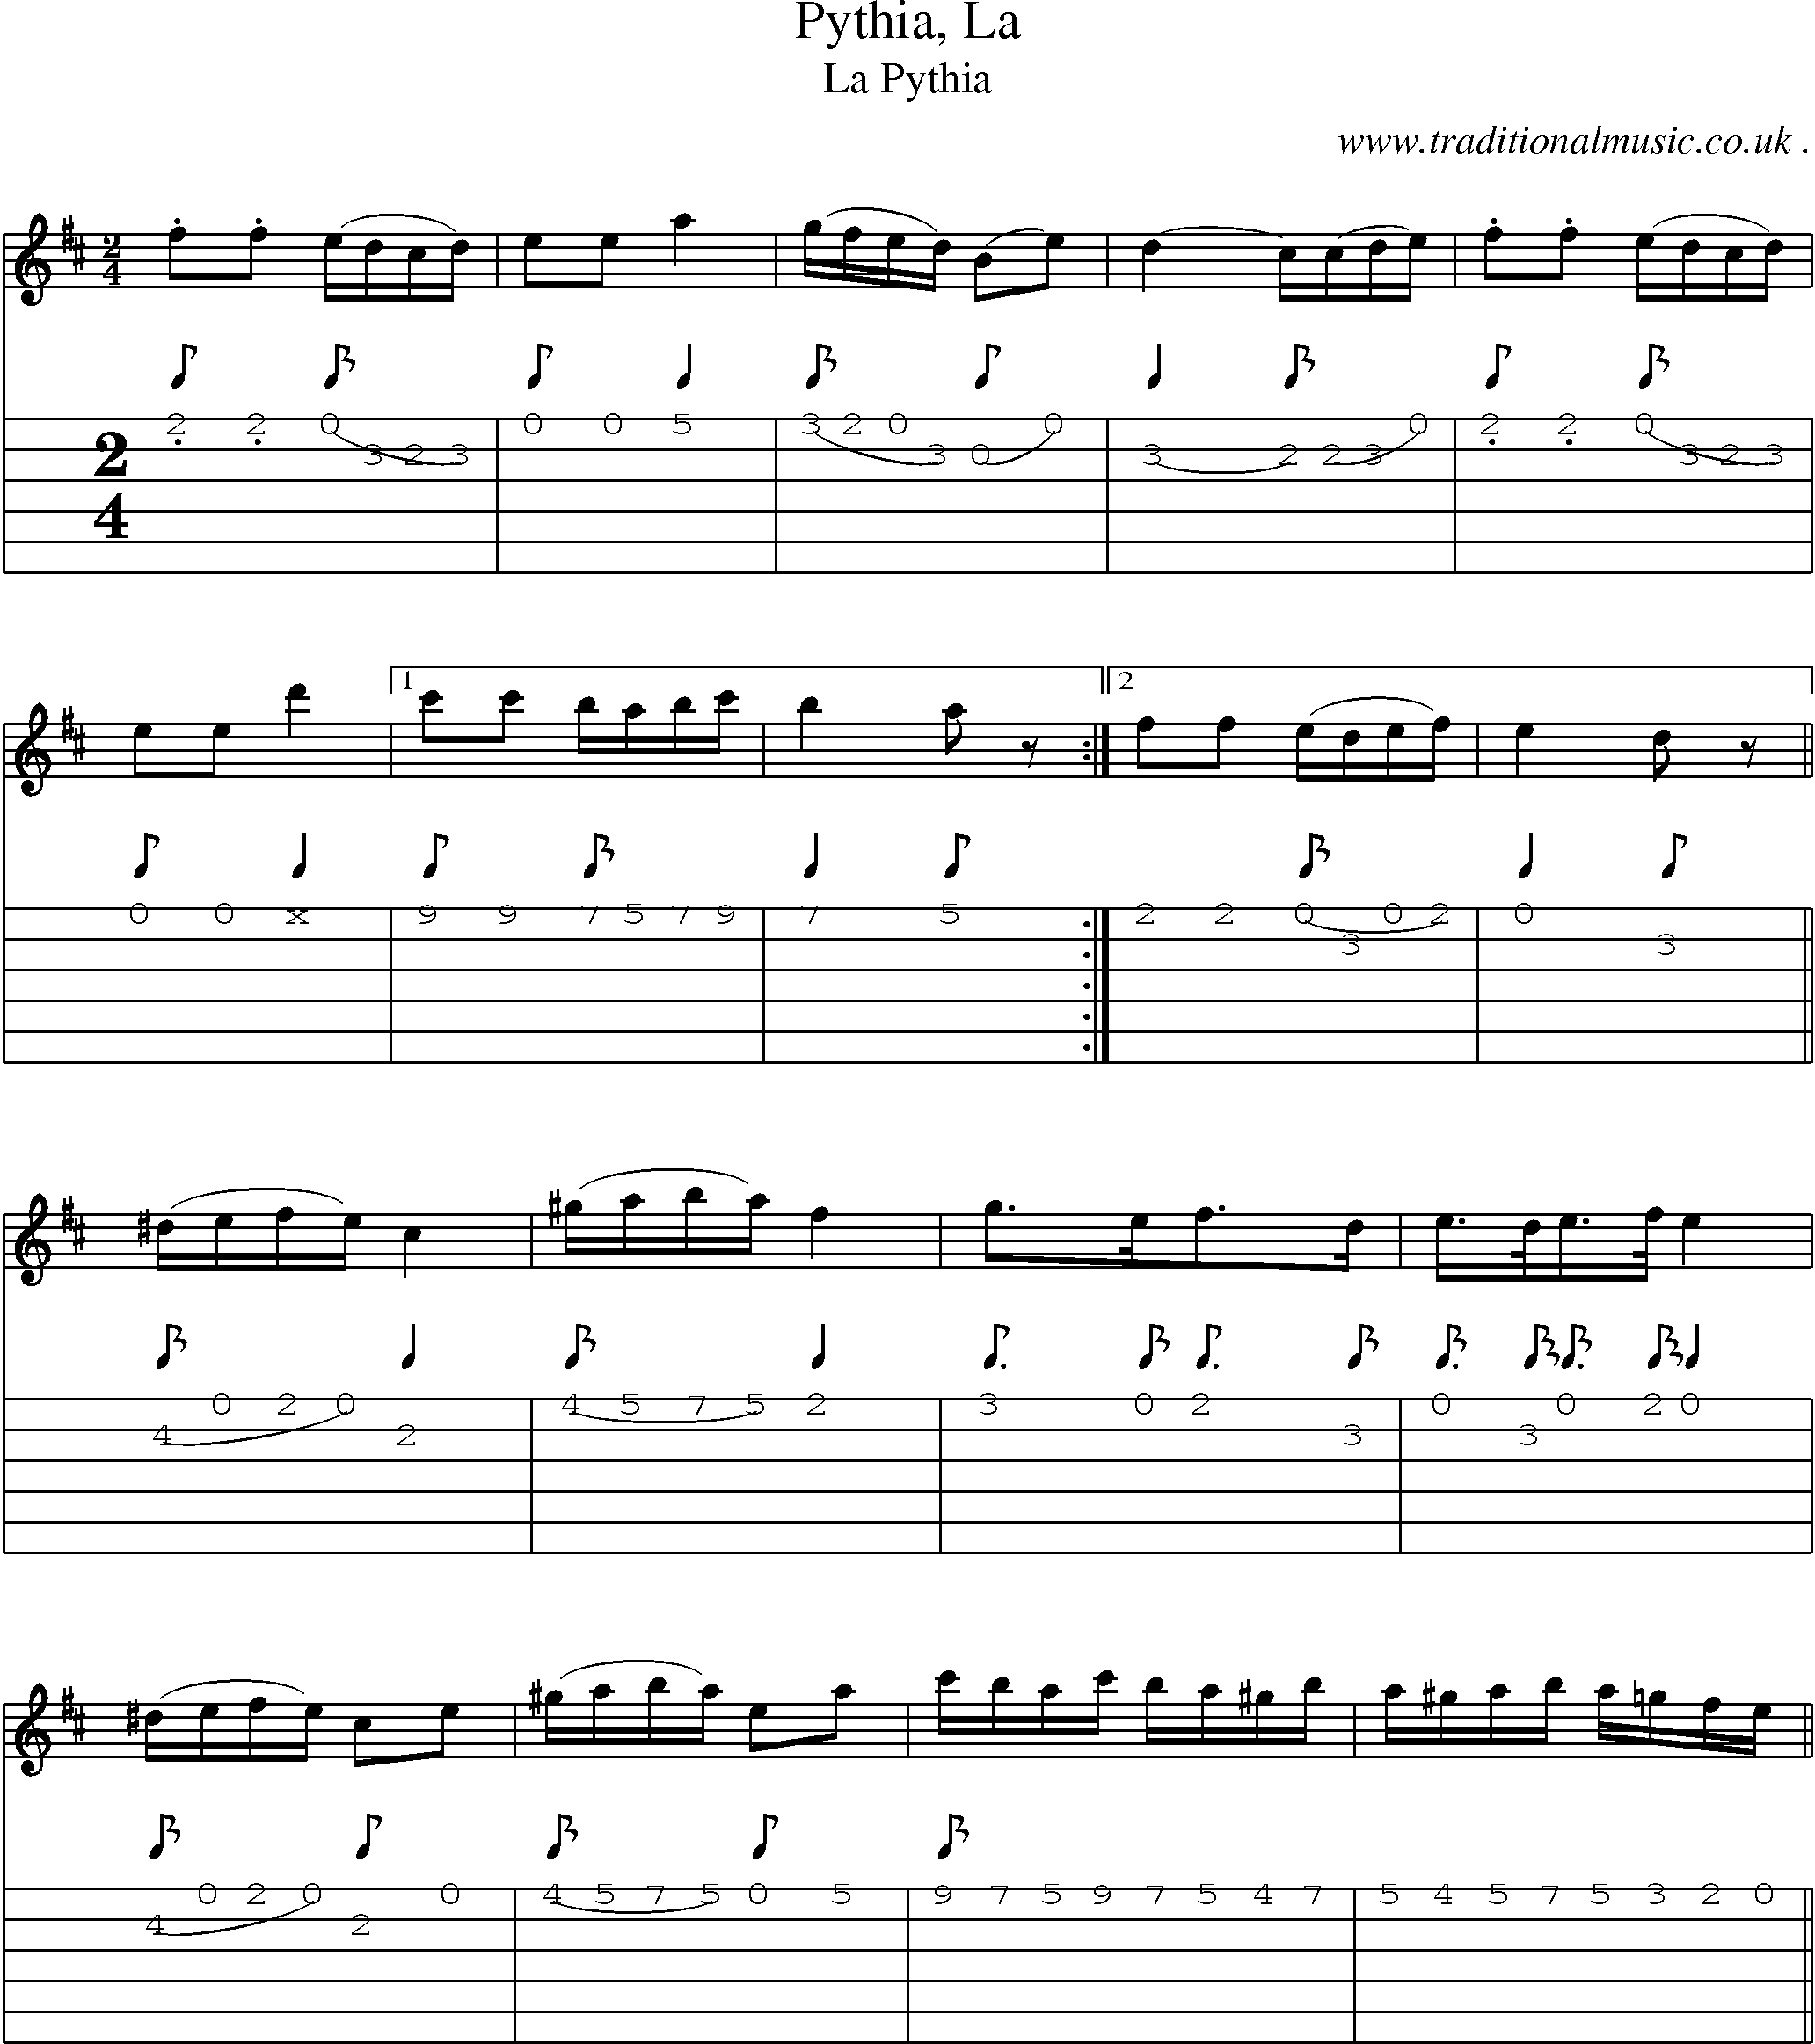 Sheet-Music and Guitar Tabs for Pythia La